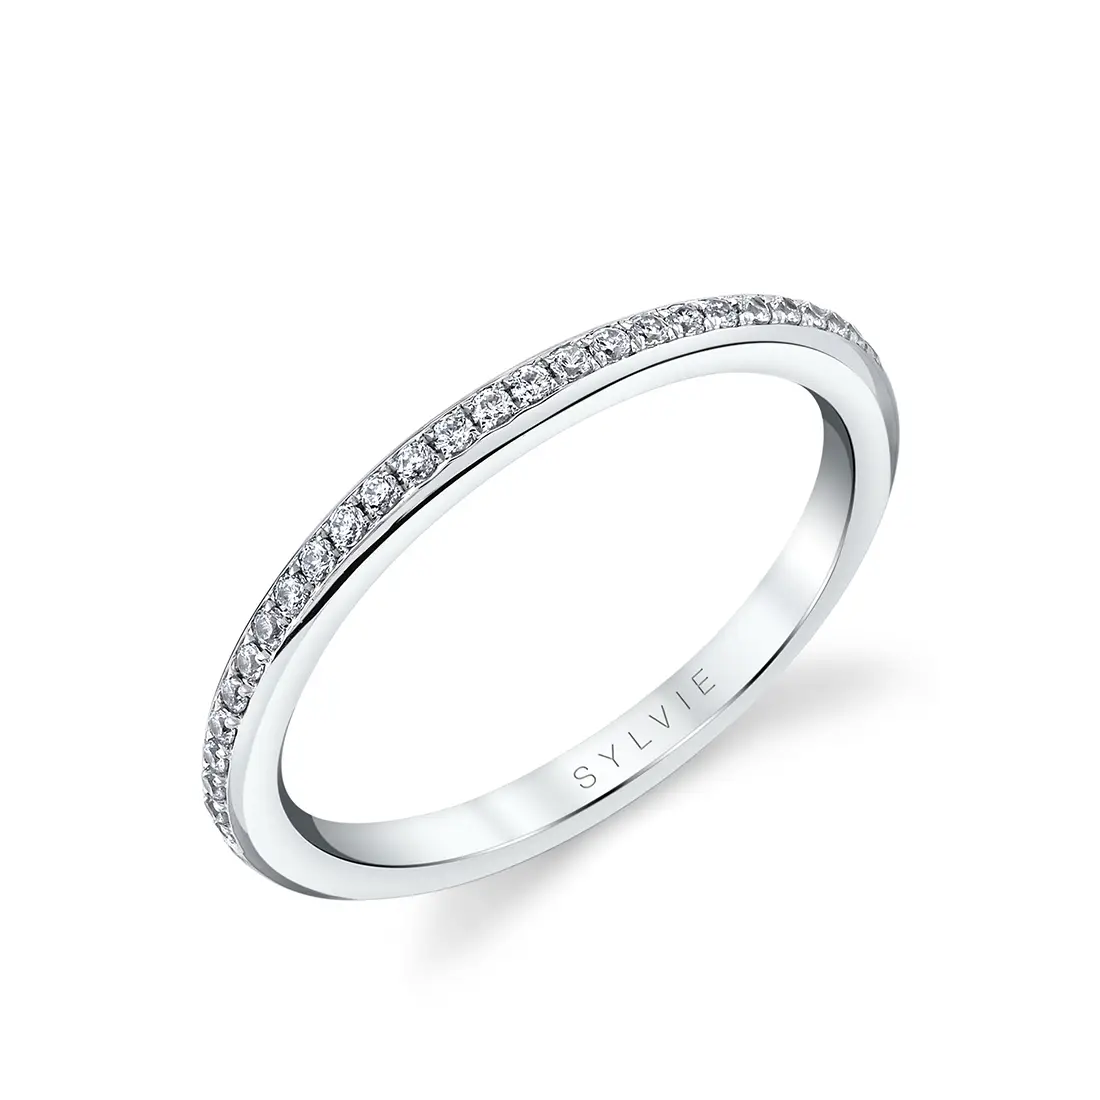 Profile Image of a Split Band Engagement Ring - Aleese